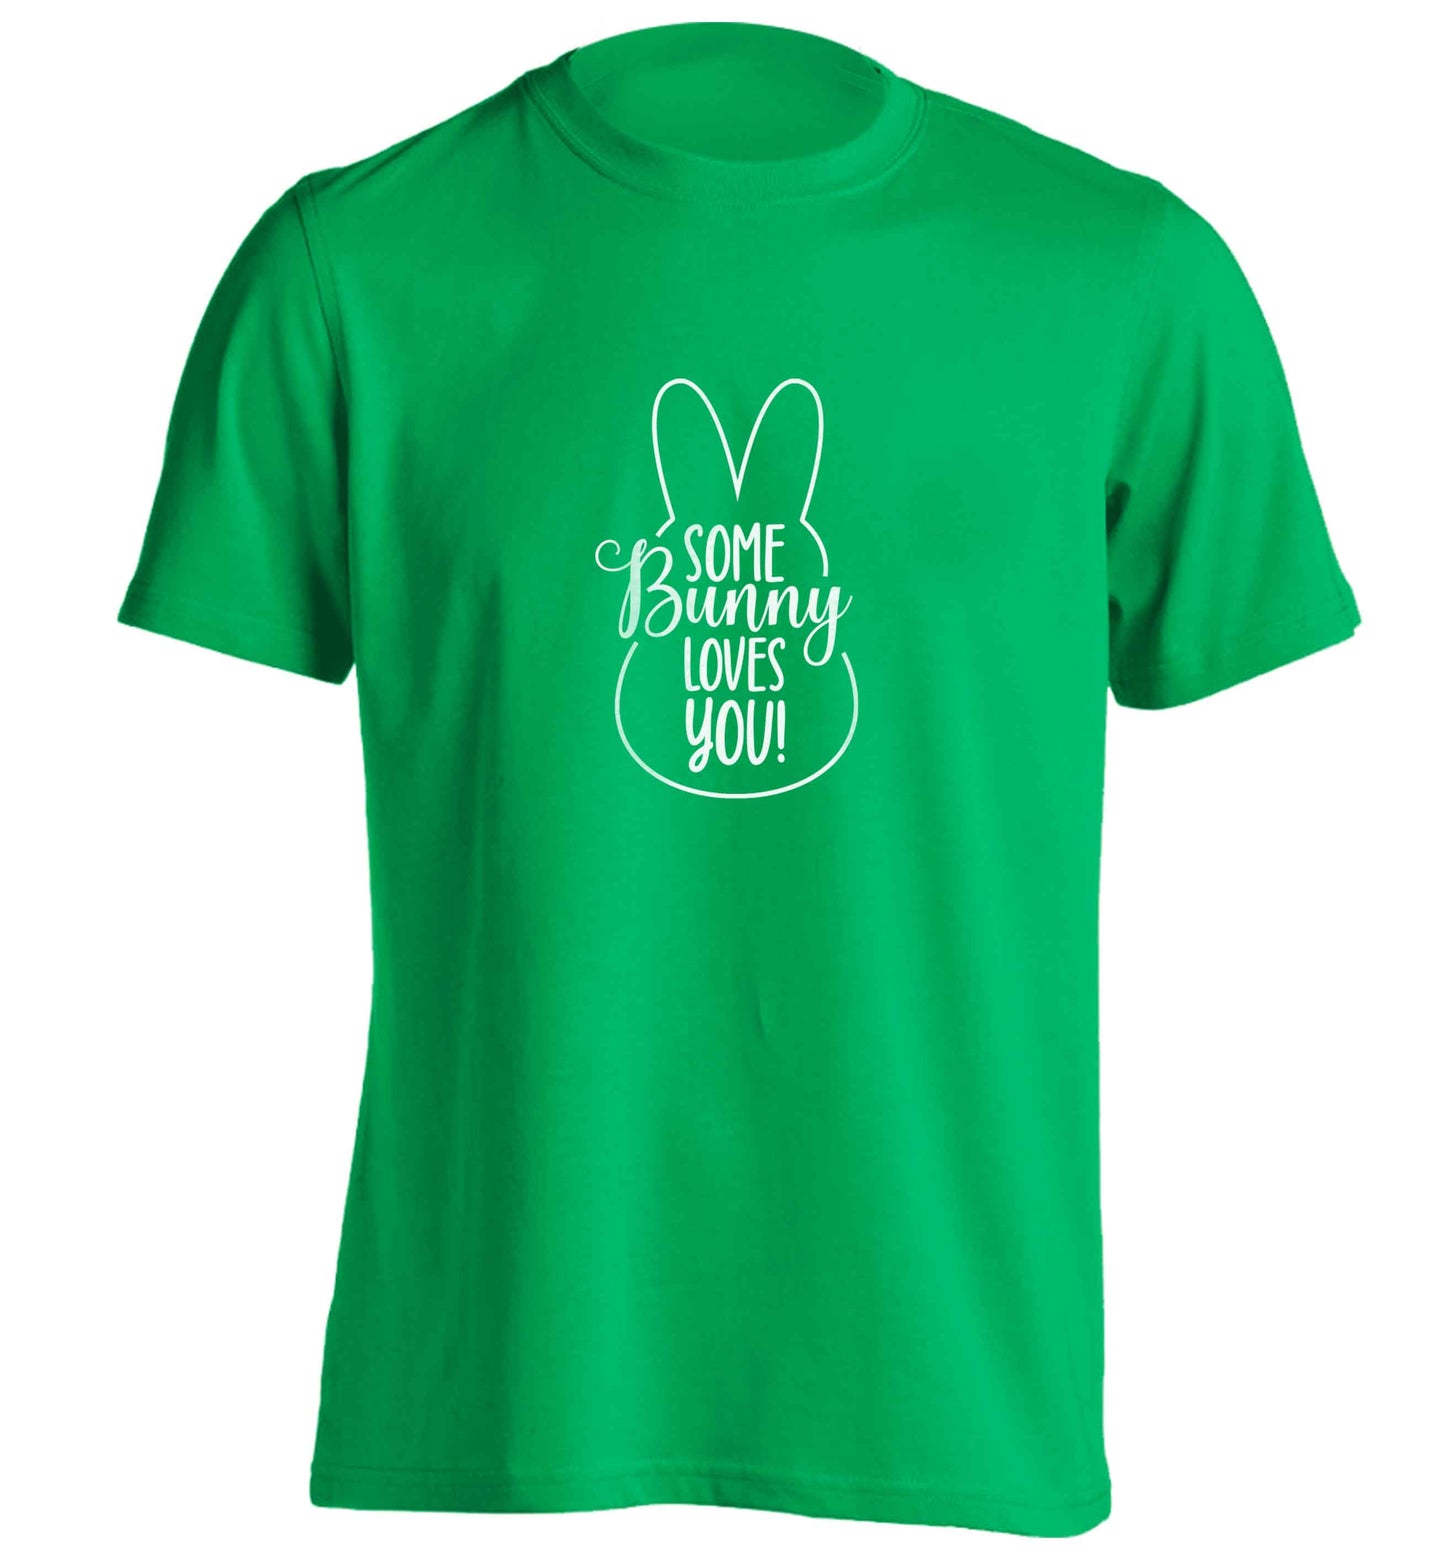 Some bunny loves you adults unisex green Tshirt 2XL